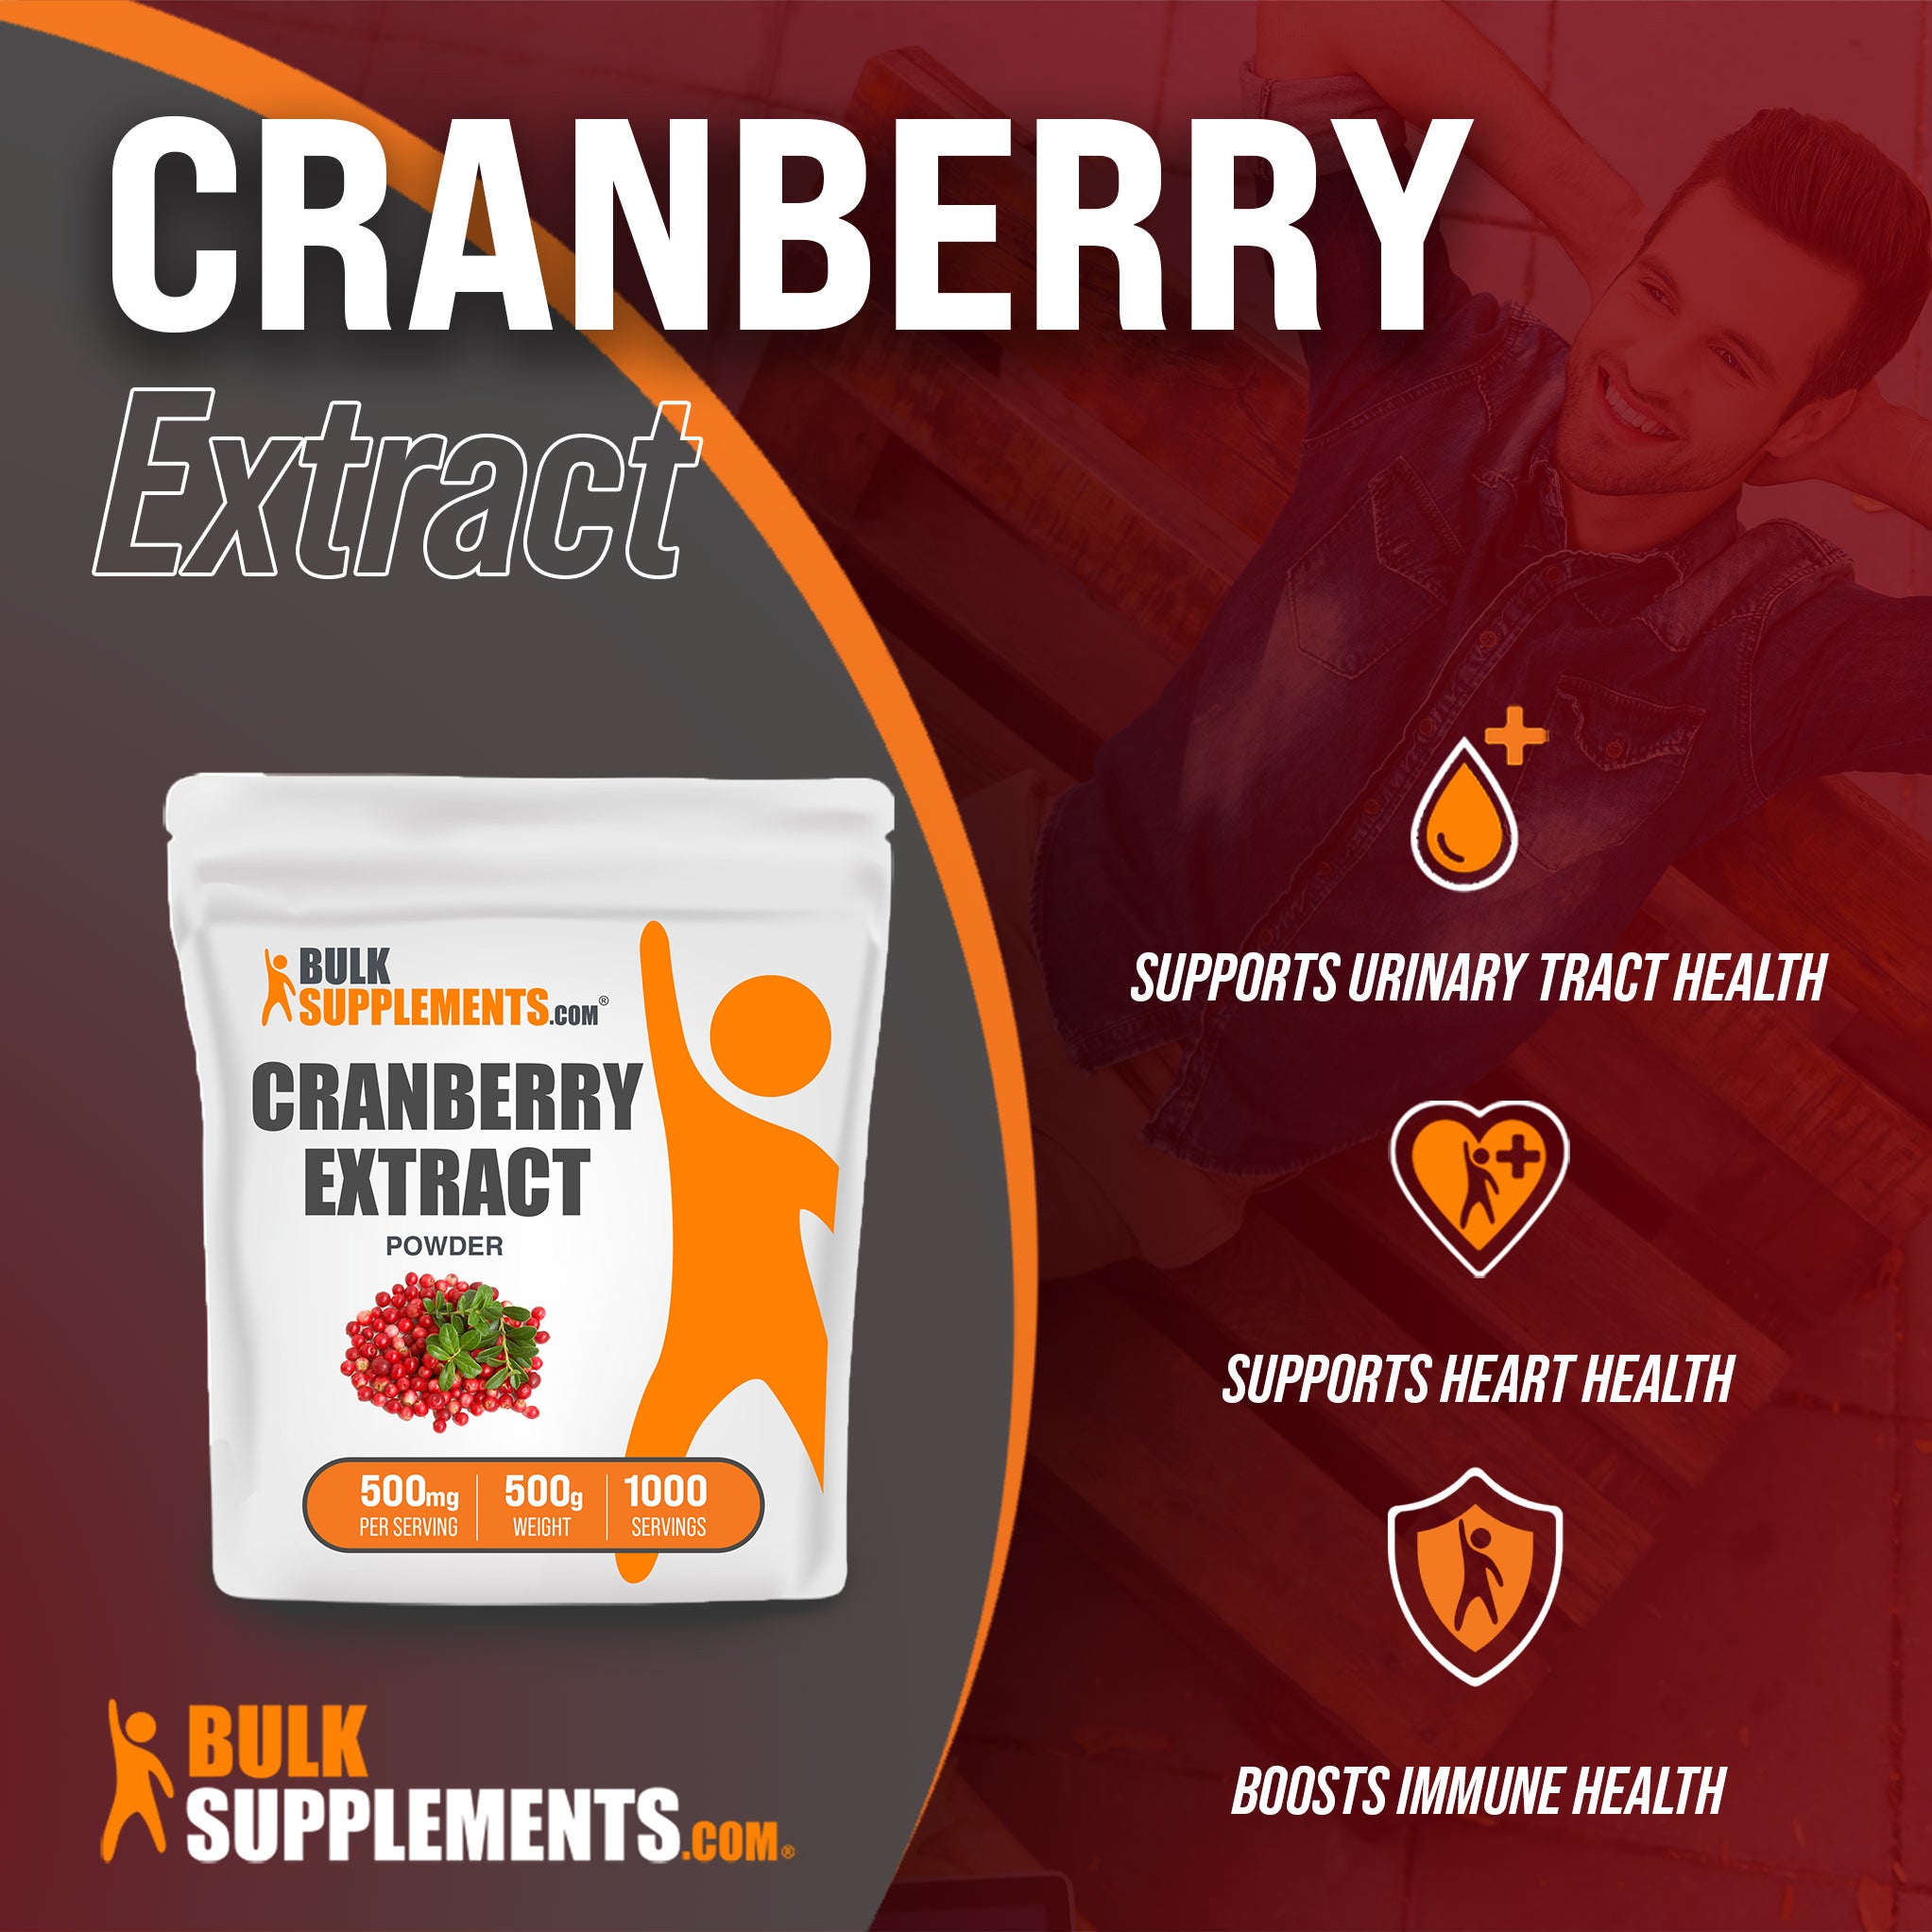 Benefits of Cranberry Extract; supports urinary tract health, supports heart health, boosts immune health